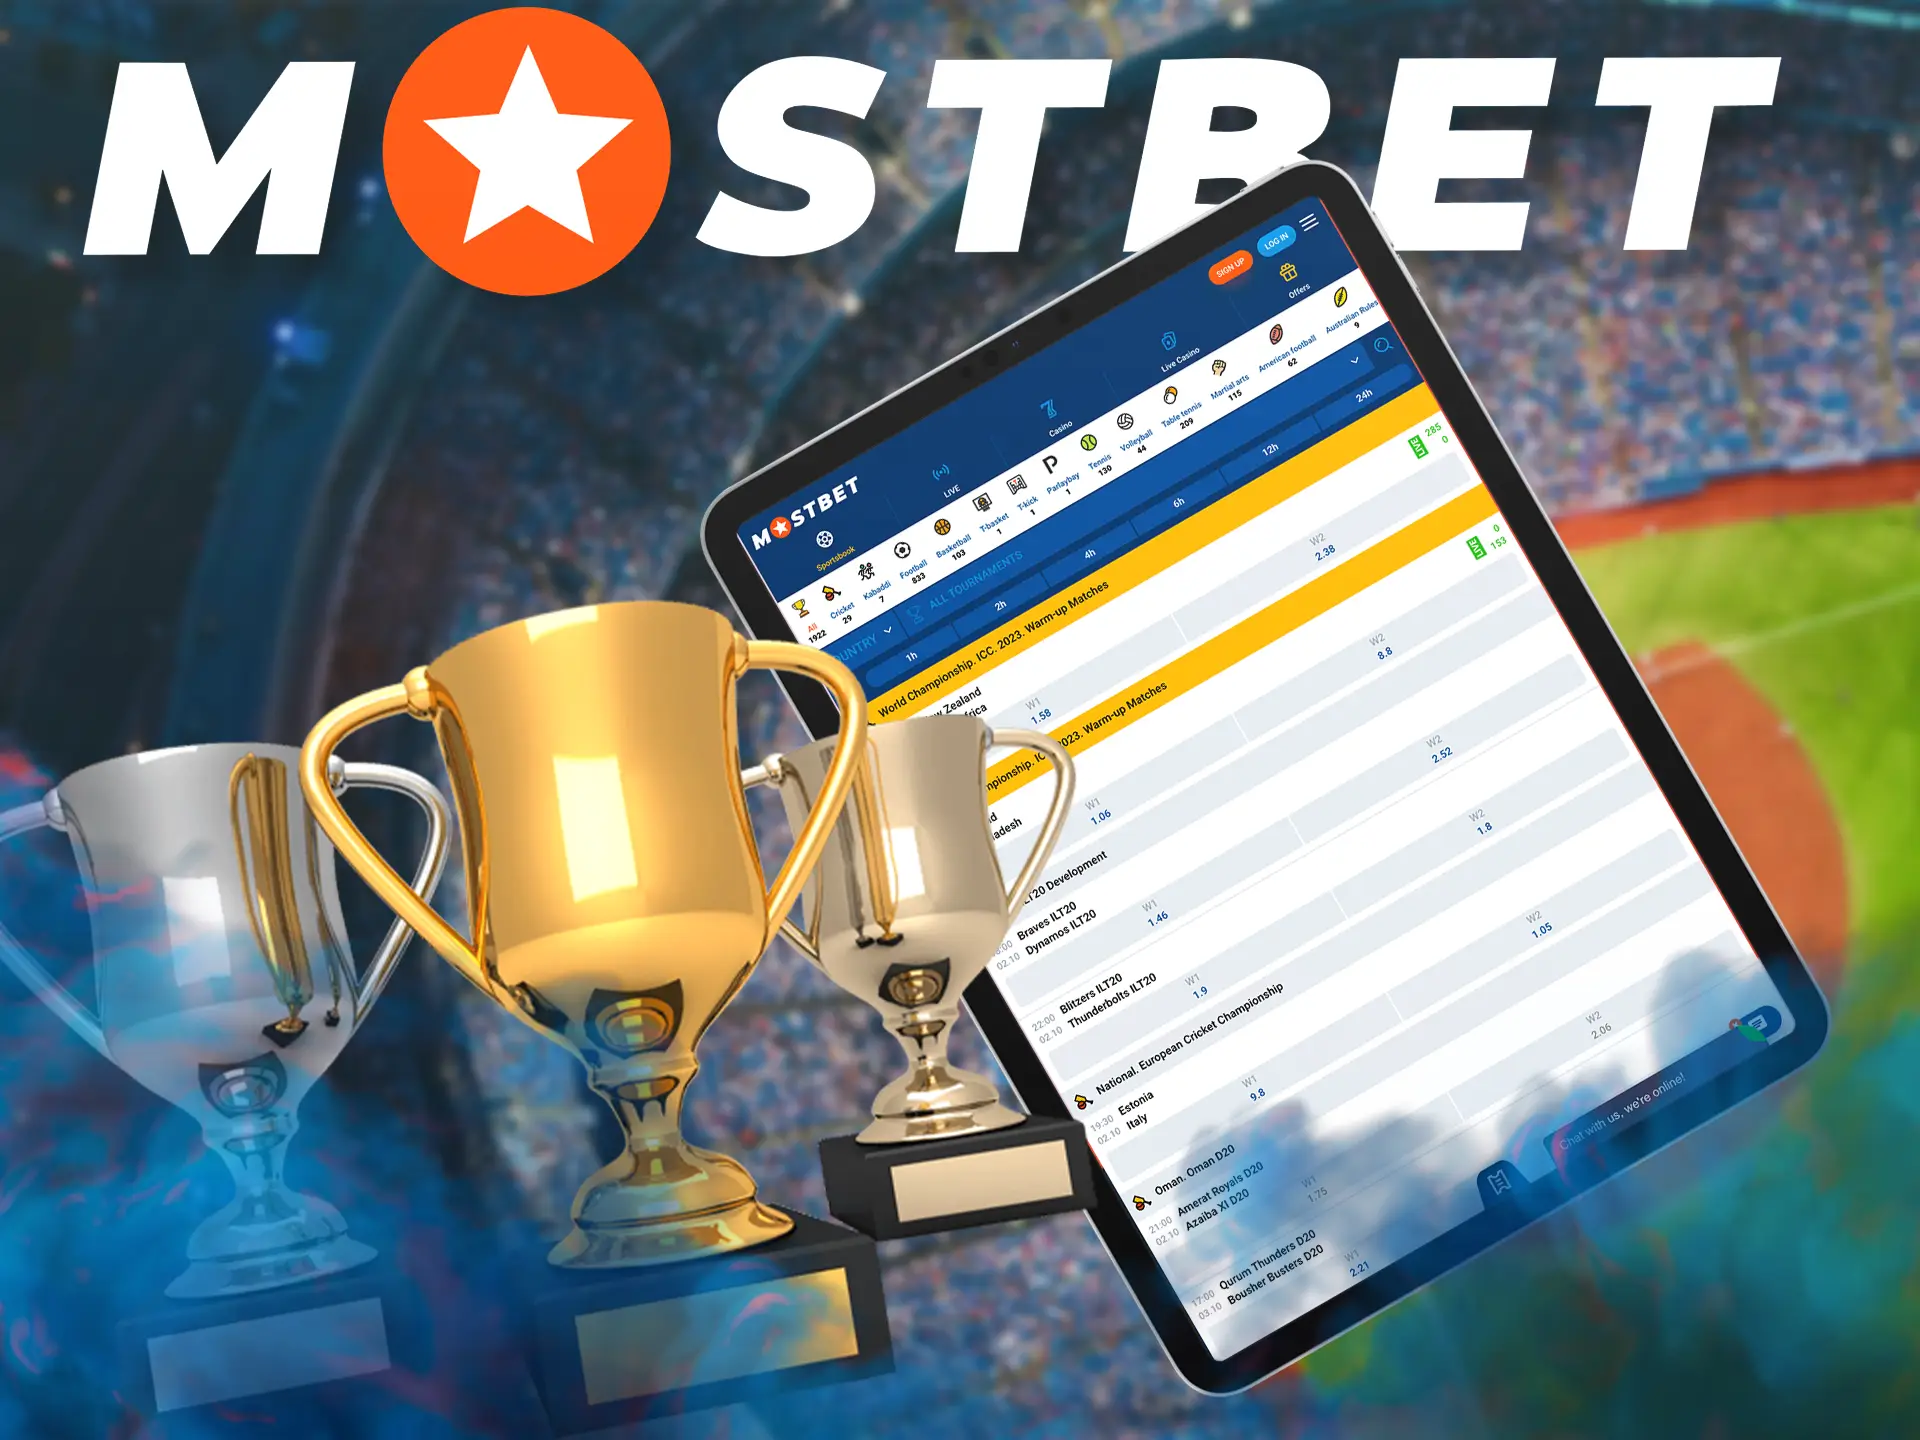 You'll find plenty of interesting markets and keep up to date with the latest sporting events at Mostbet.